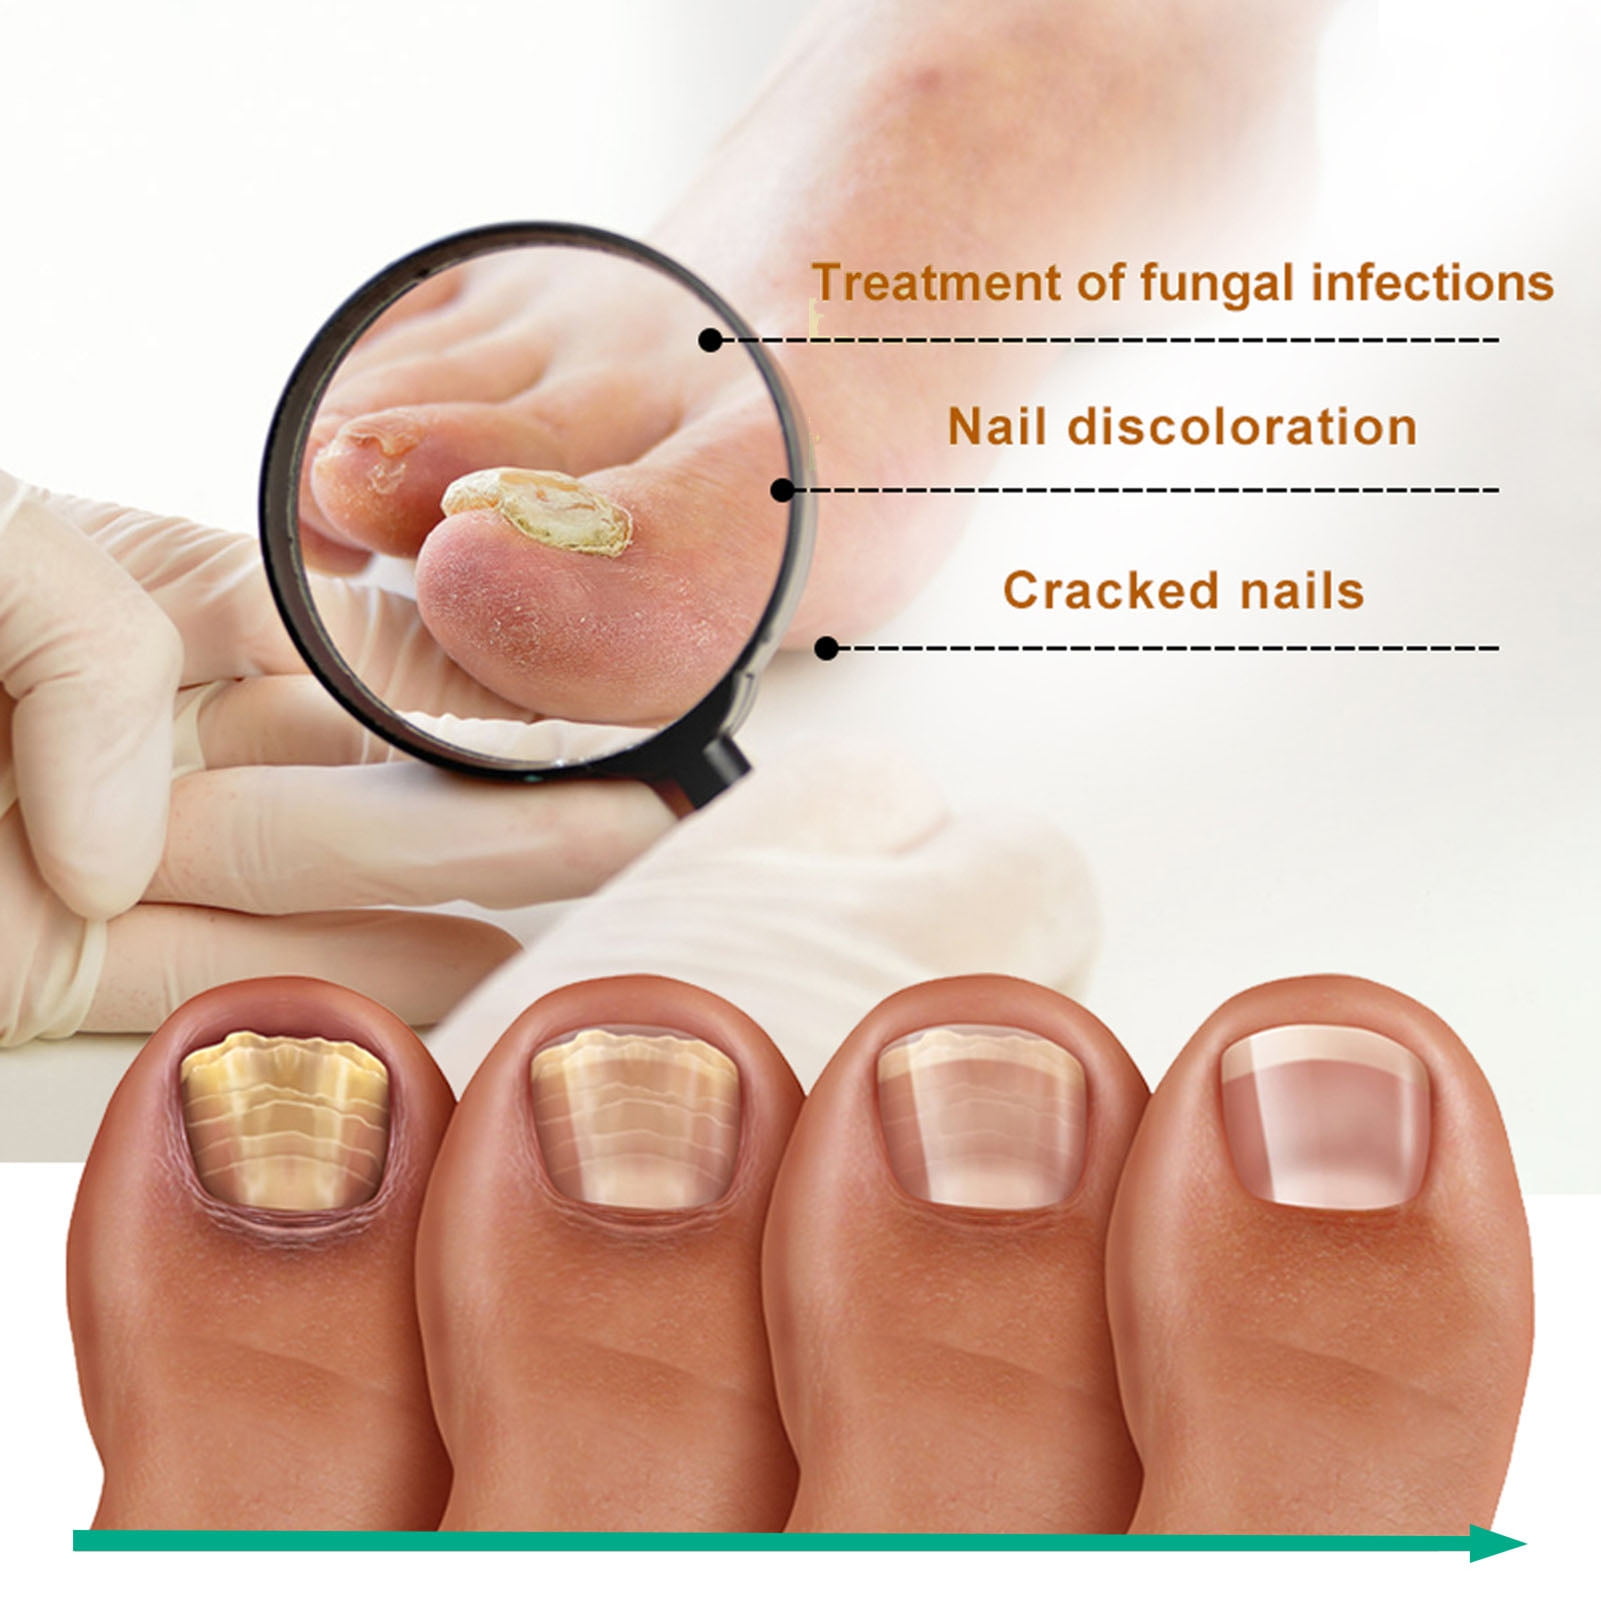 Fungal Nail Infections: Symptoms, Causes And Treatment